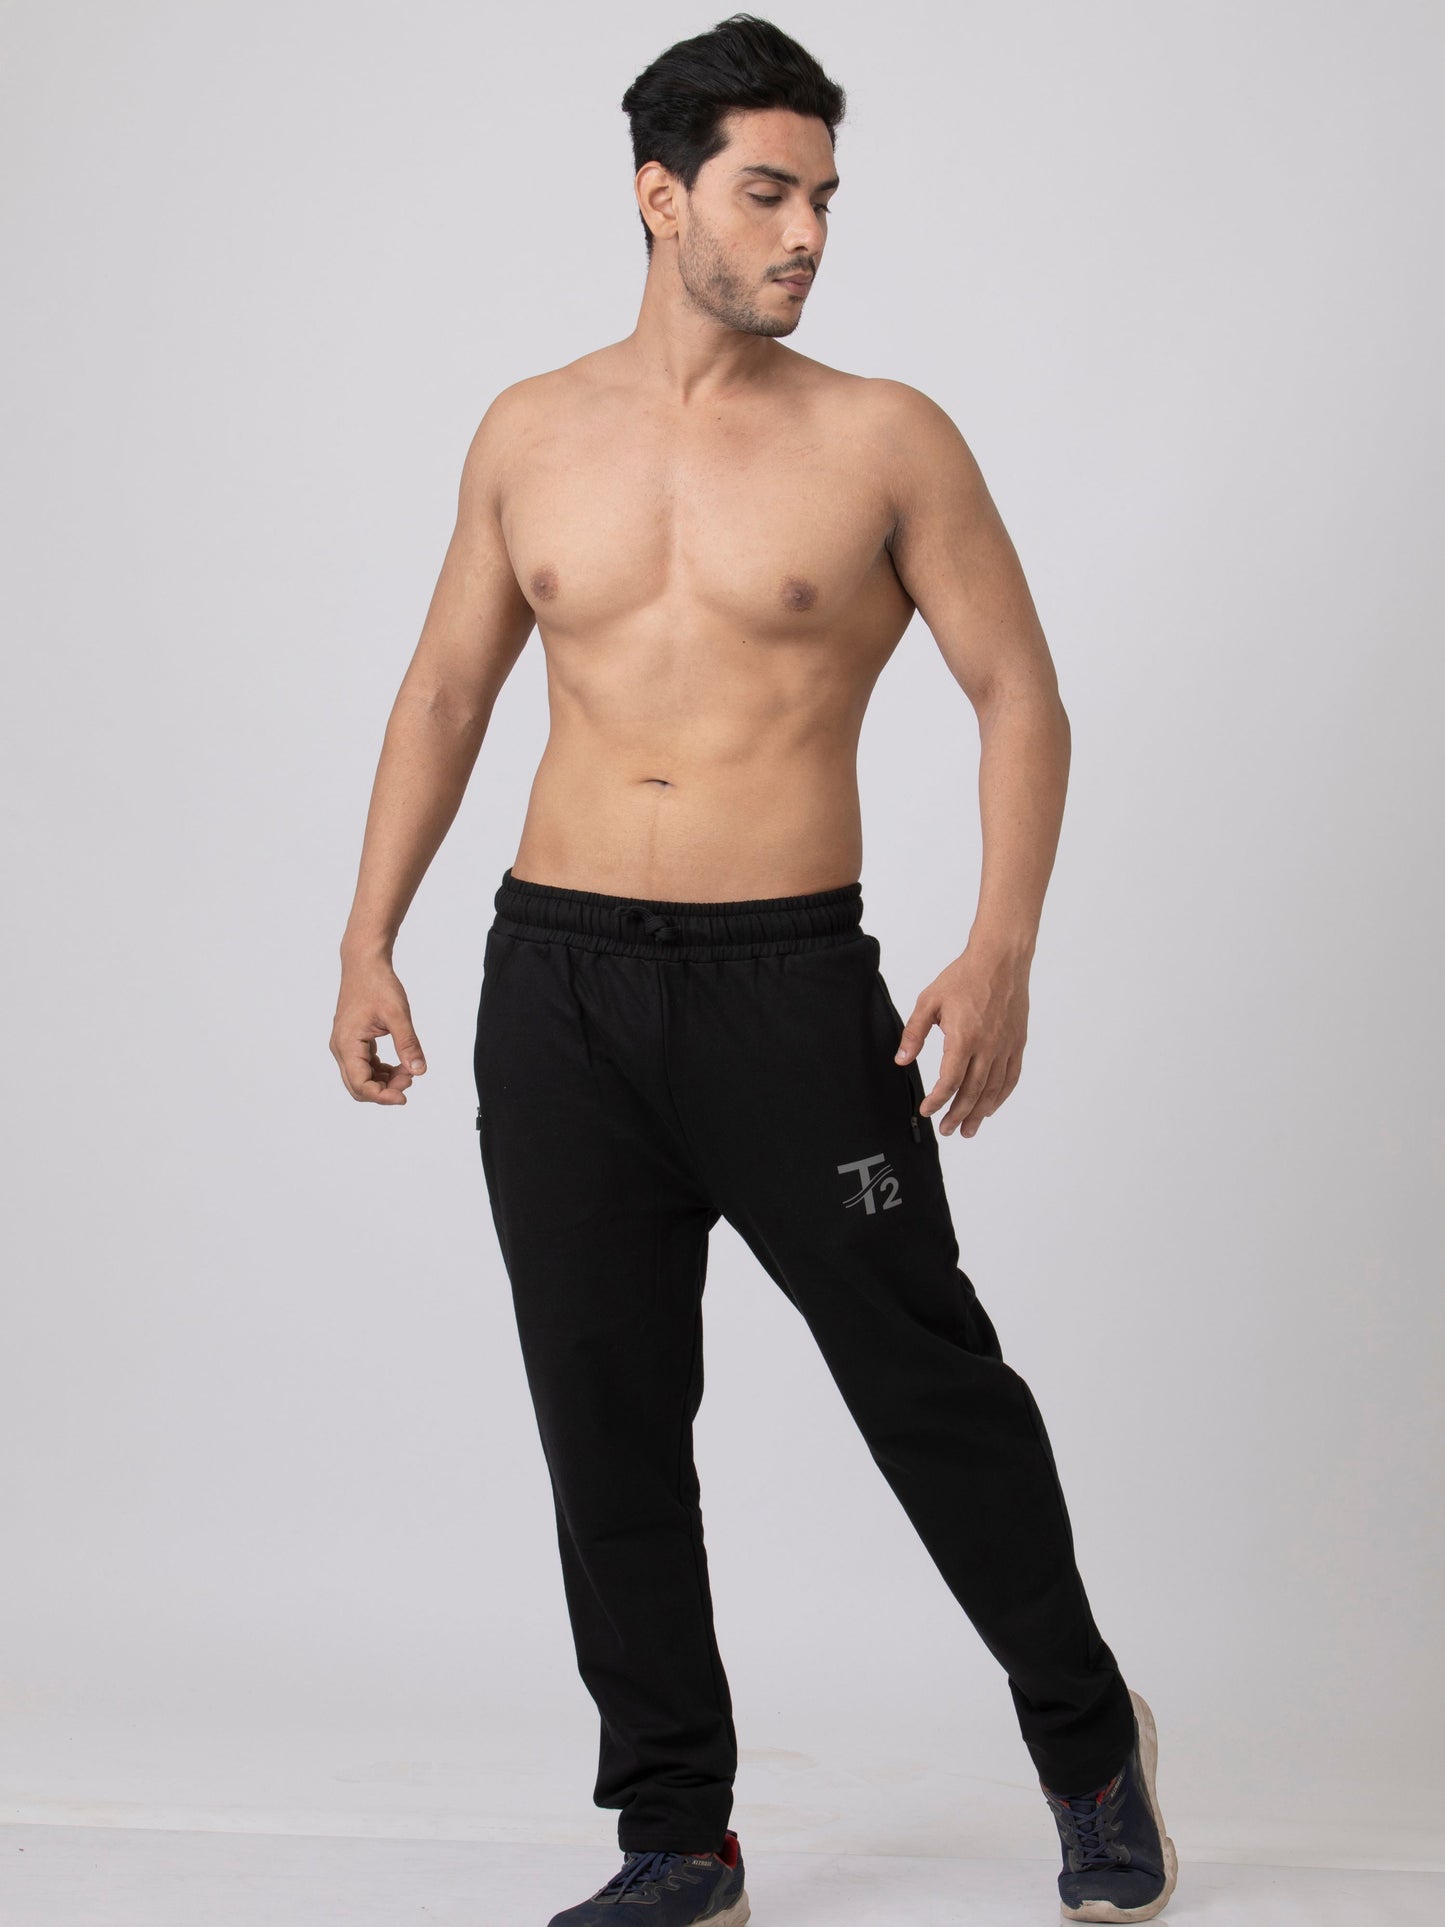 Black Stretchy Men's Athleisure Jogger Pant - With Pockets & Zippers